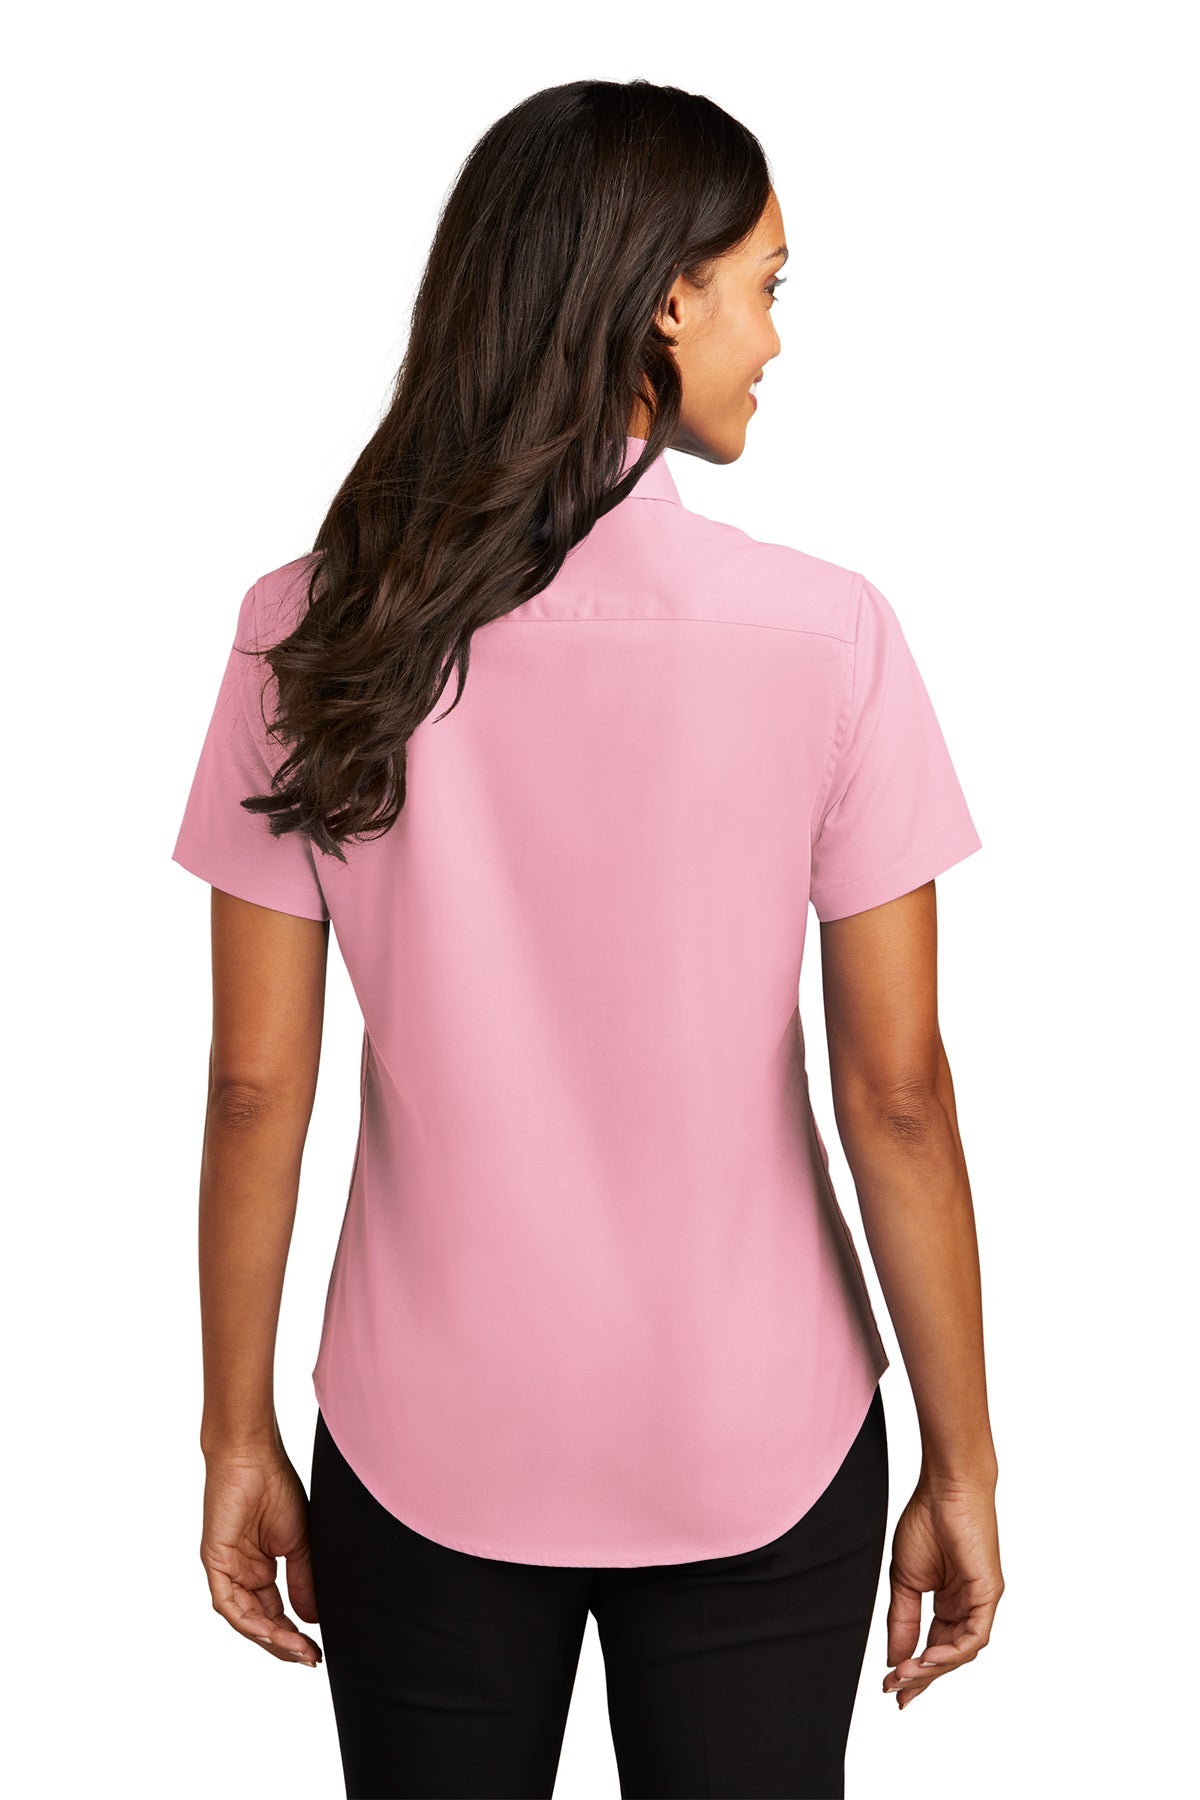 Port Authority Ladies Short Sleeve Easy Care Shirt, Product